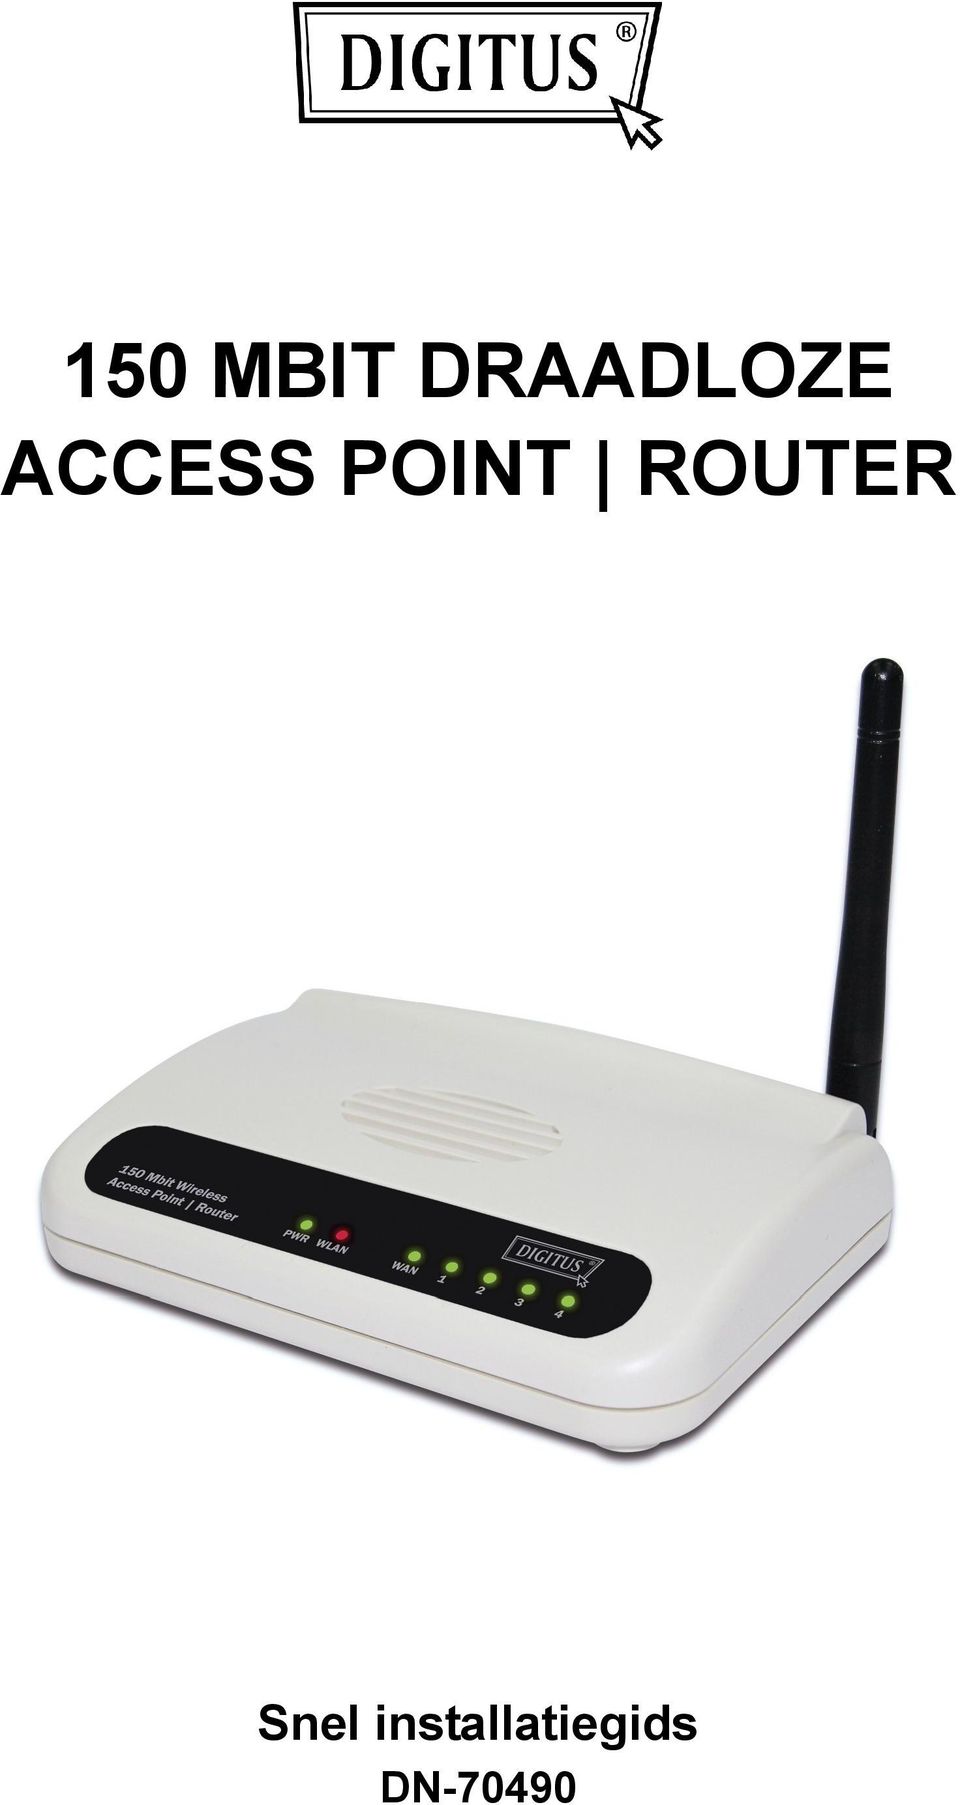 POINT ROUTER